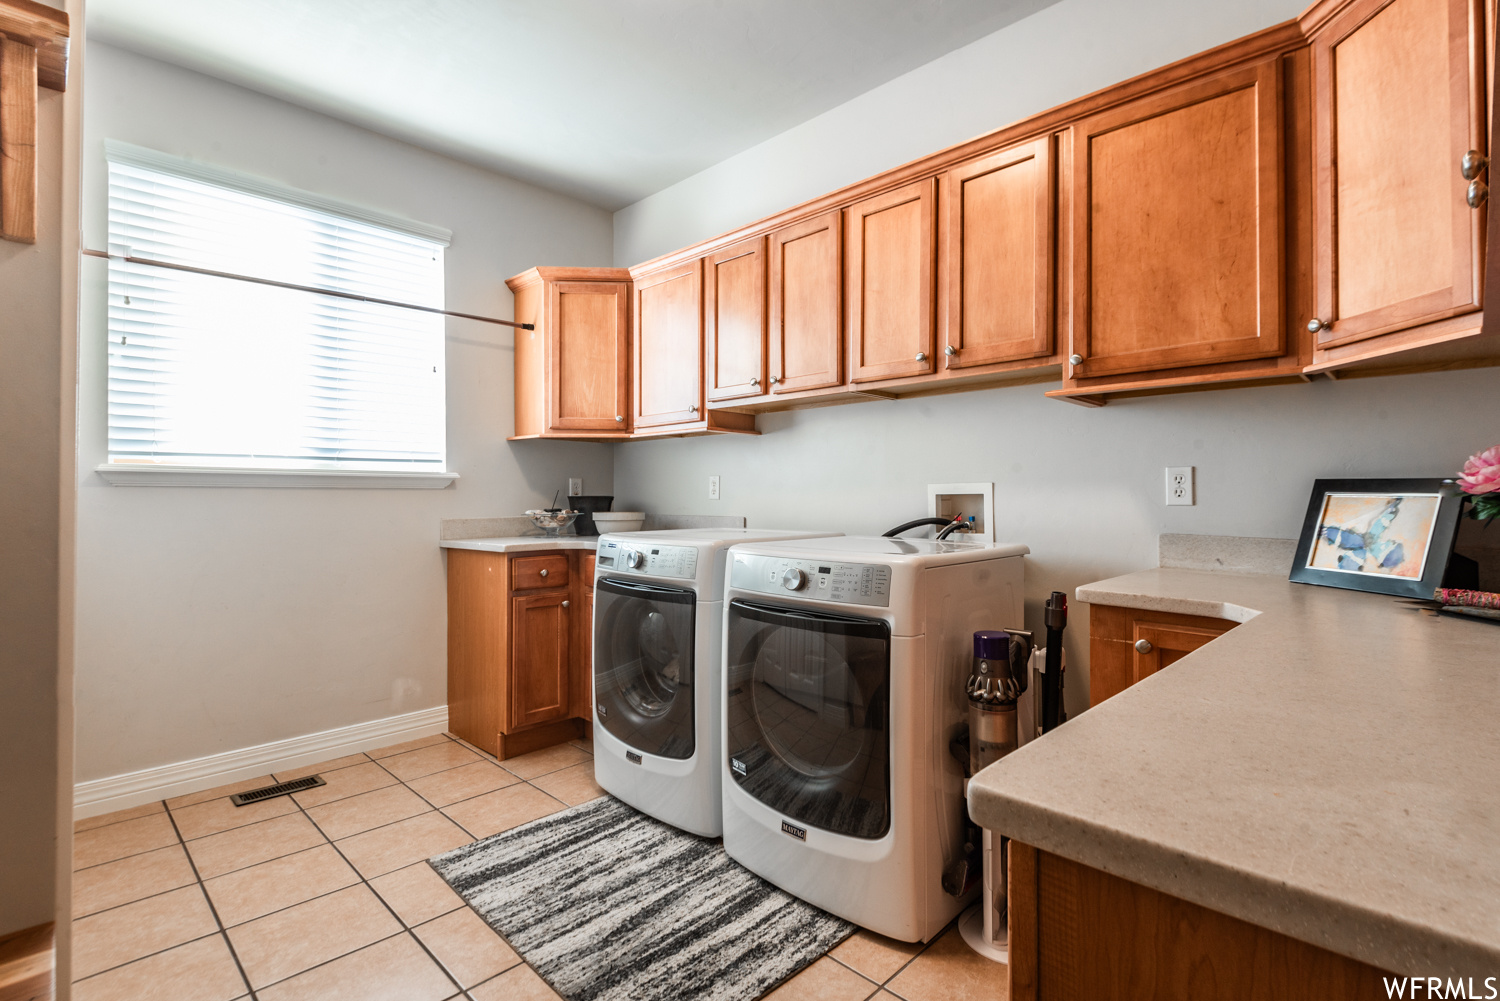 Washroom with light tile floors, cabinets, hookup for a washing machine, and washer and dryer